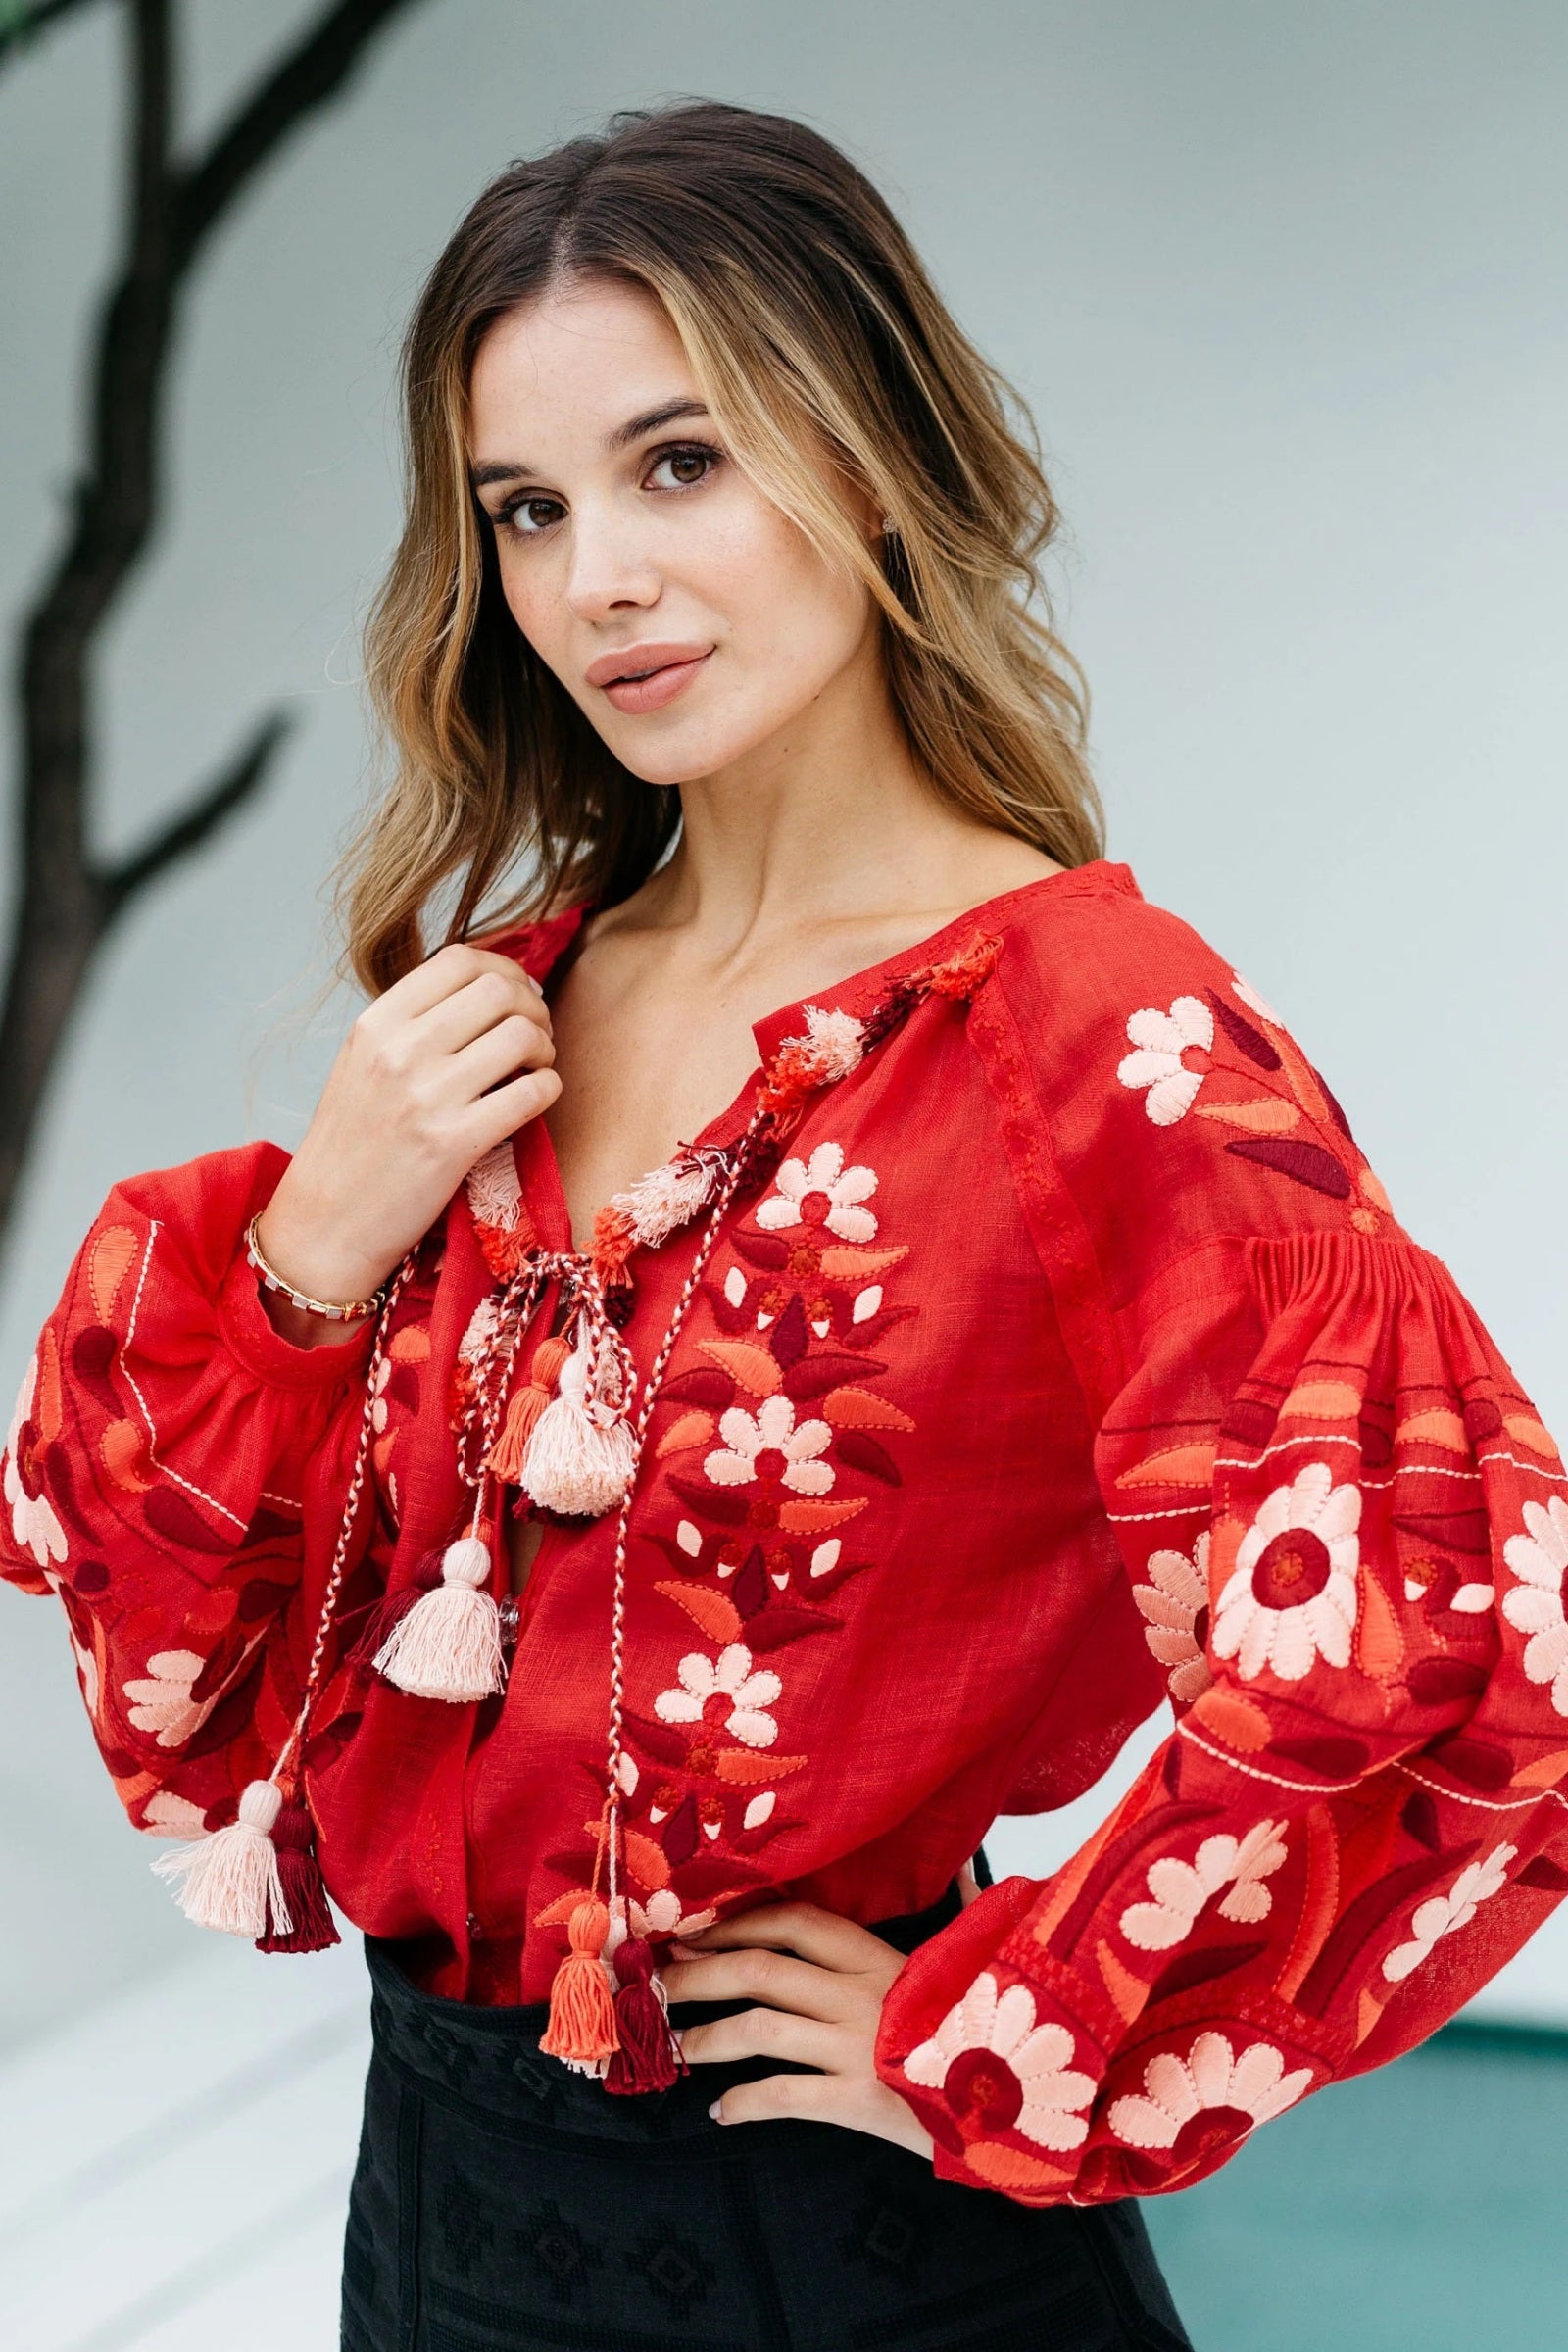 Sheer red linen blouse Vyshyvanka with Ukrainian embroidery Embroidered custom linen shirt Summer loose blouse top in see through red